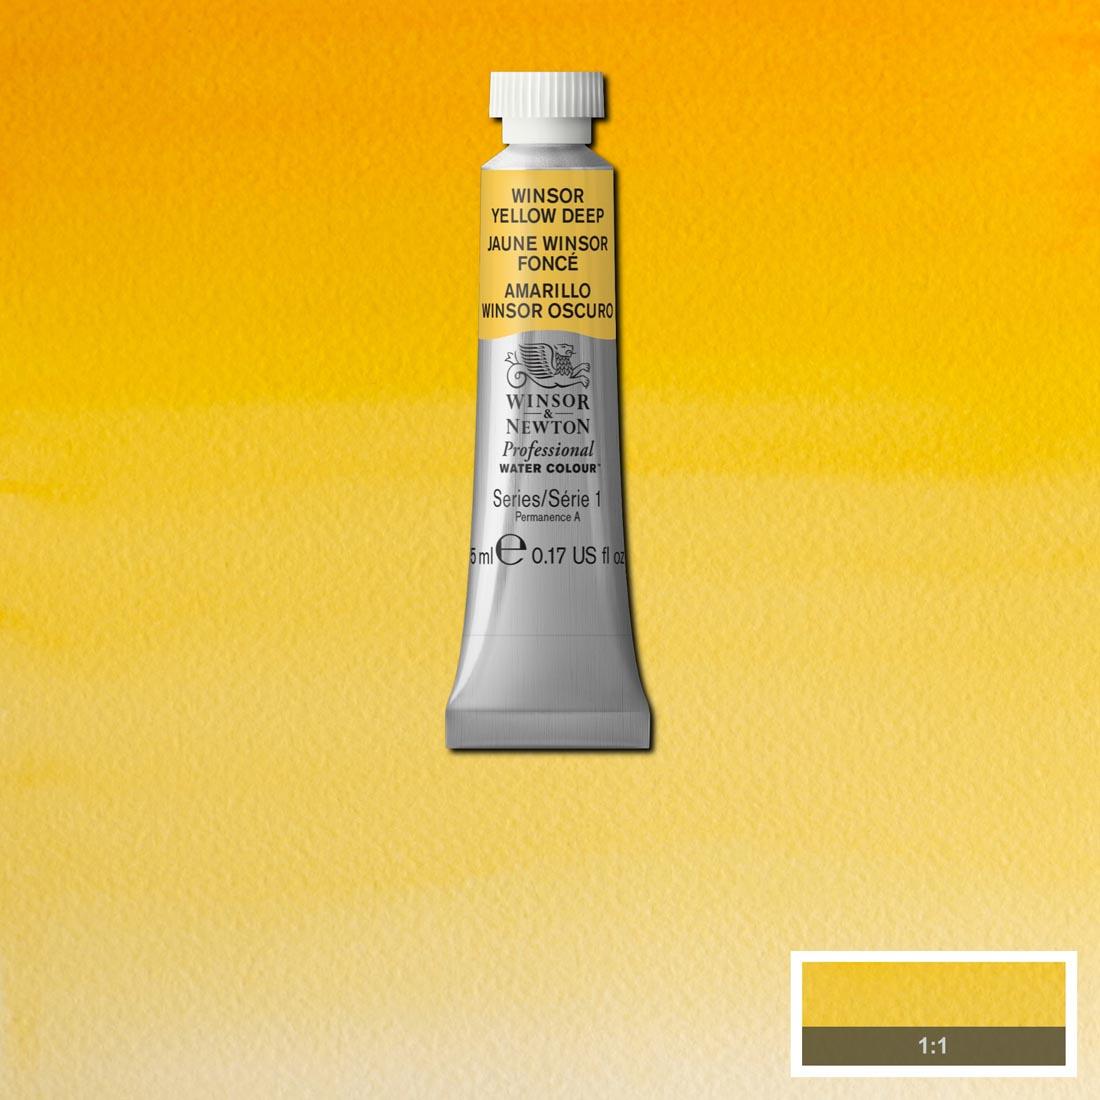 Tube of Winsor Yellow Deep Winsor & Newton Professional Water Colour with a paint swatch for the background